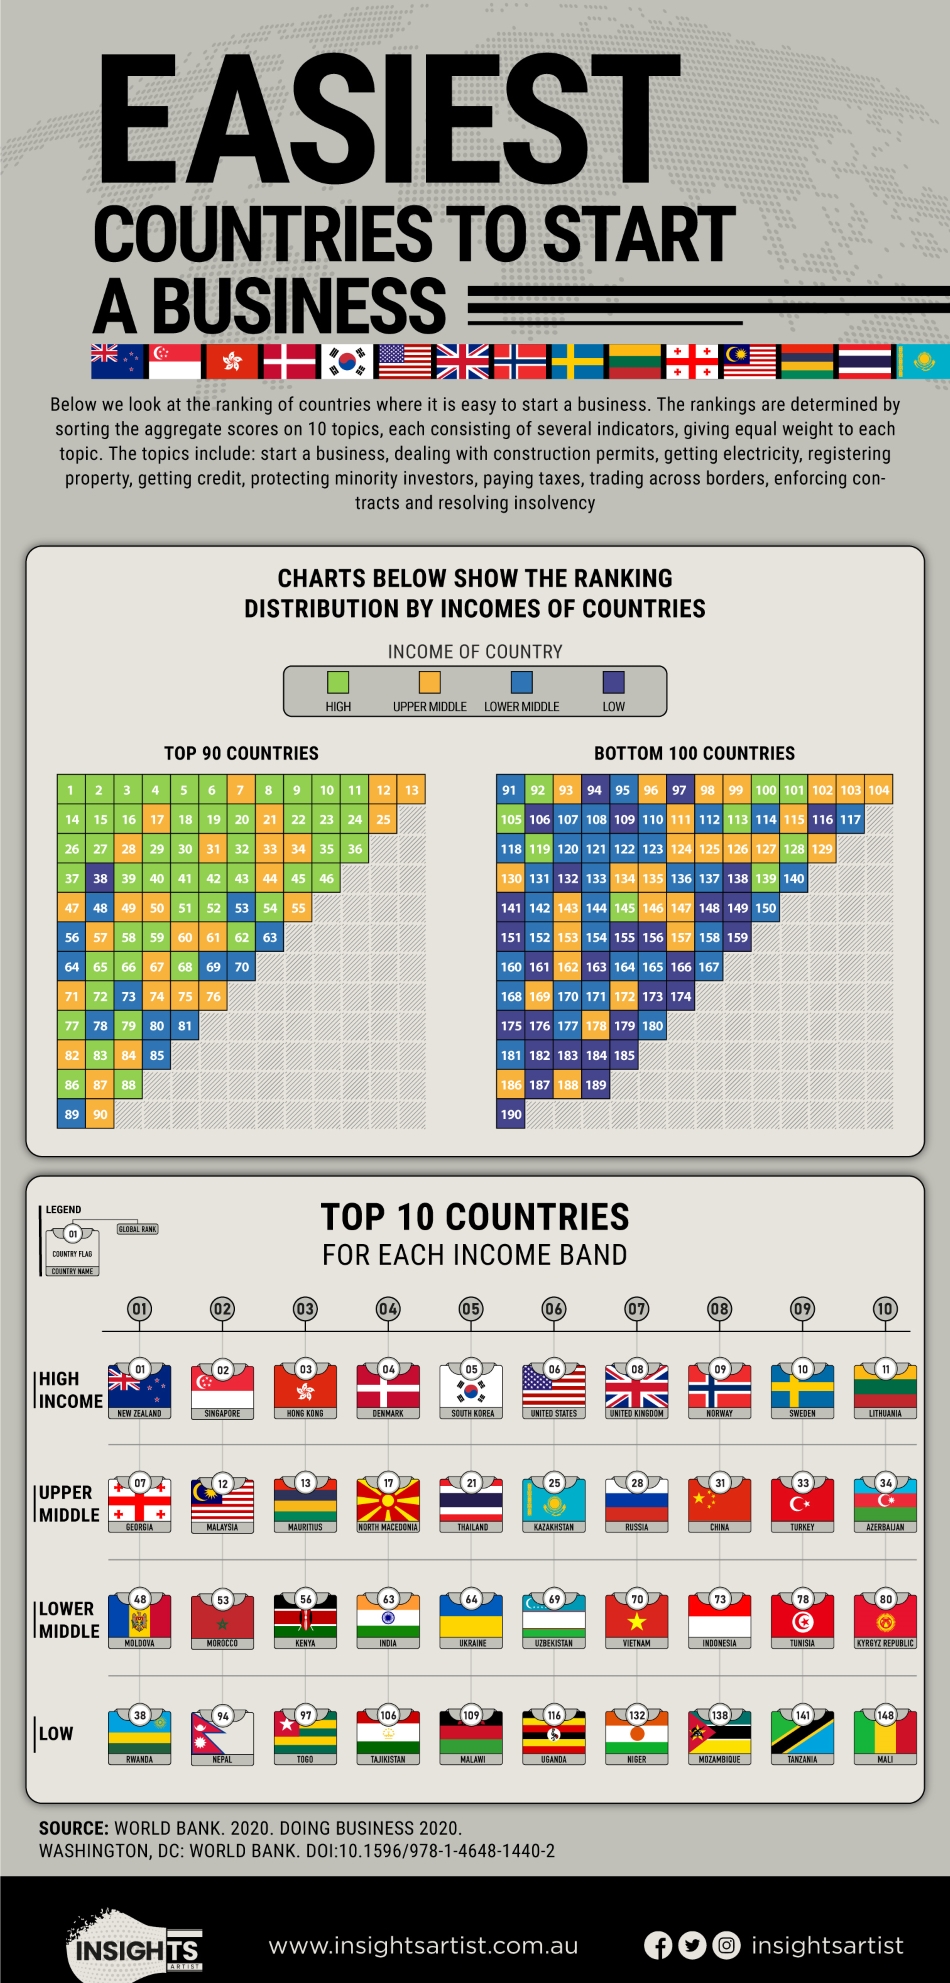 easiest countries to start a business